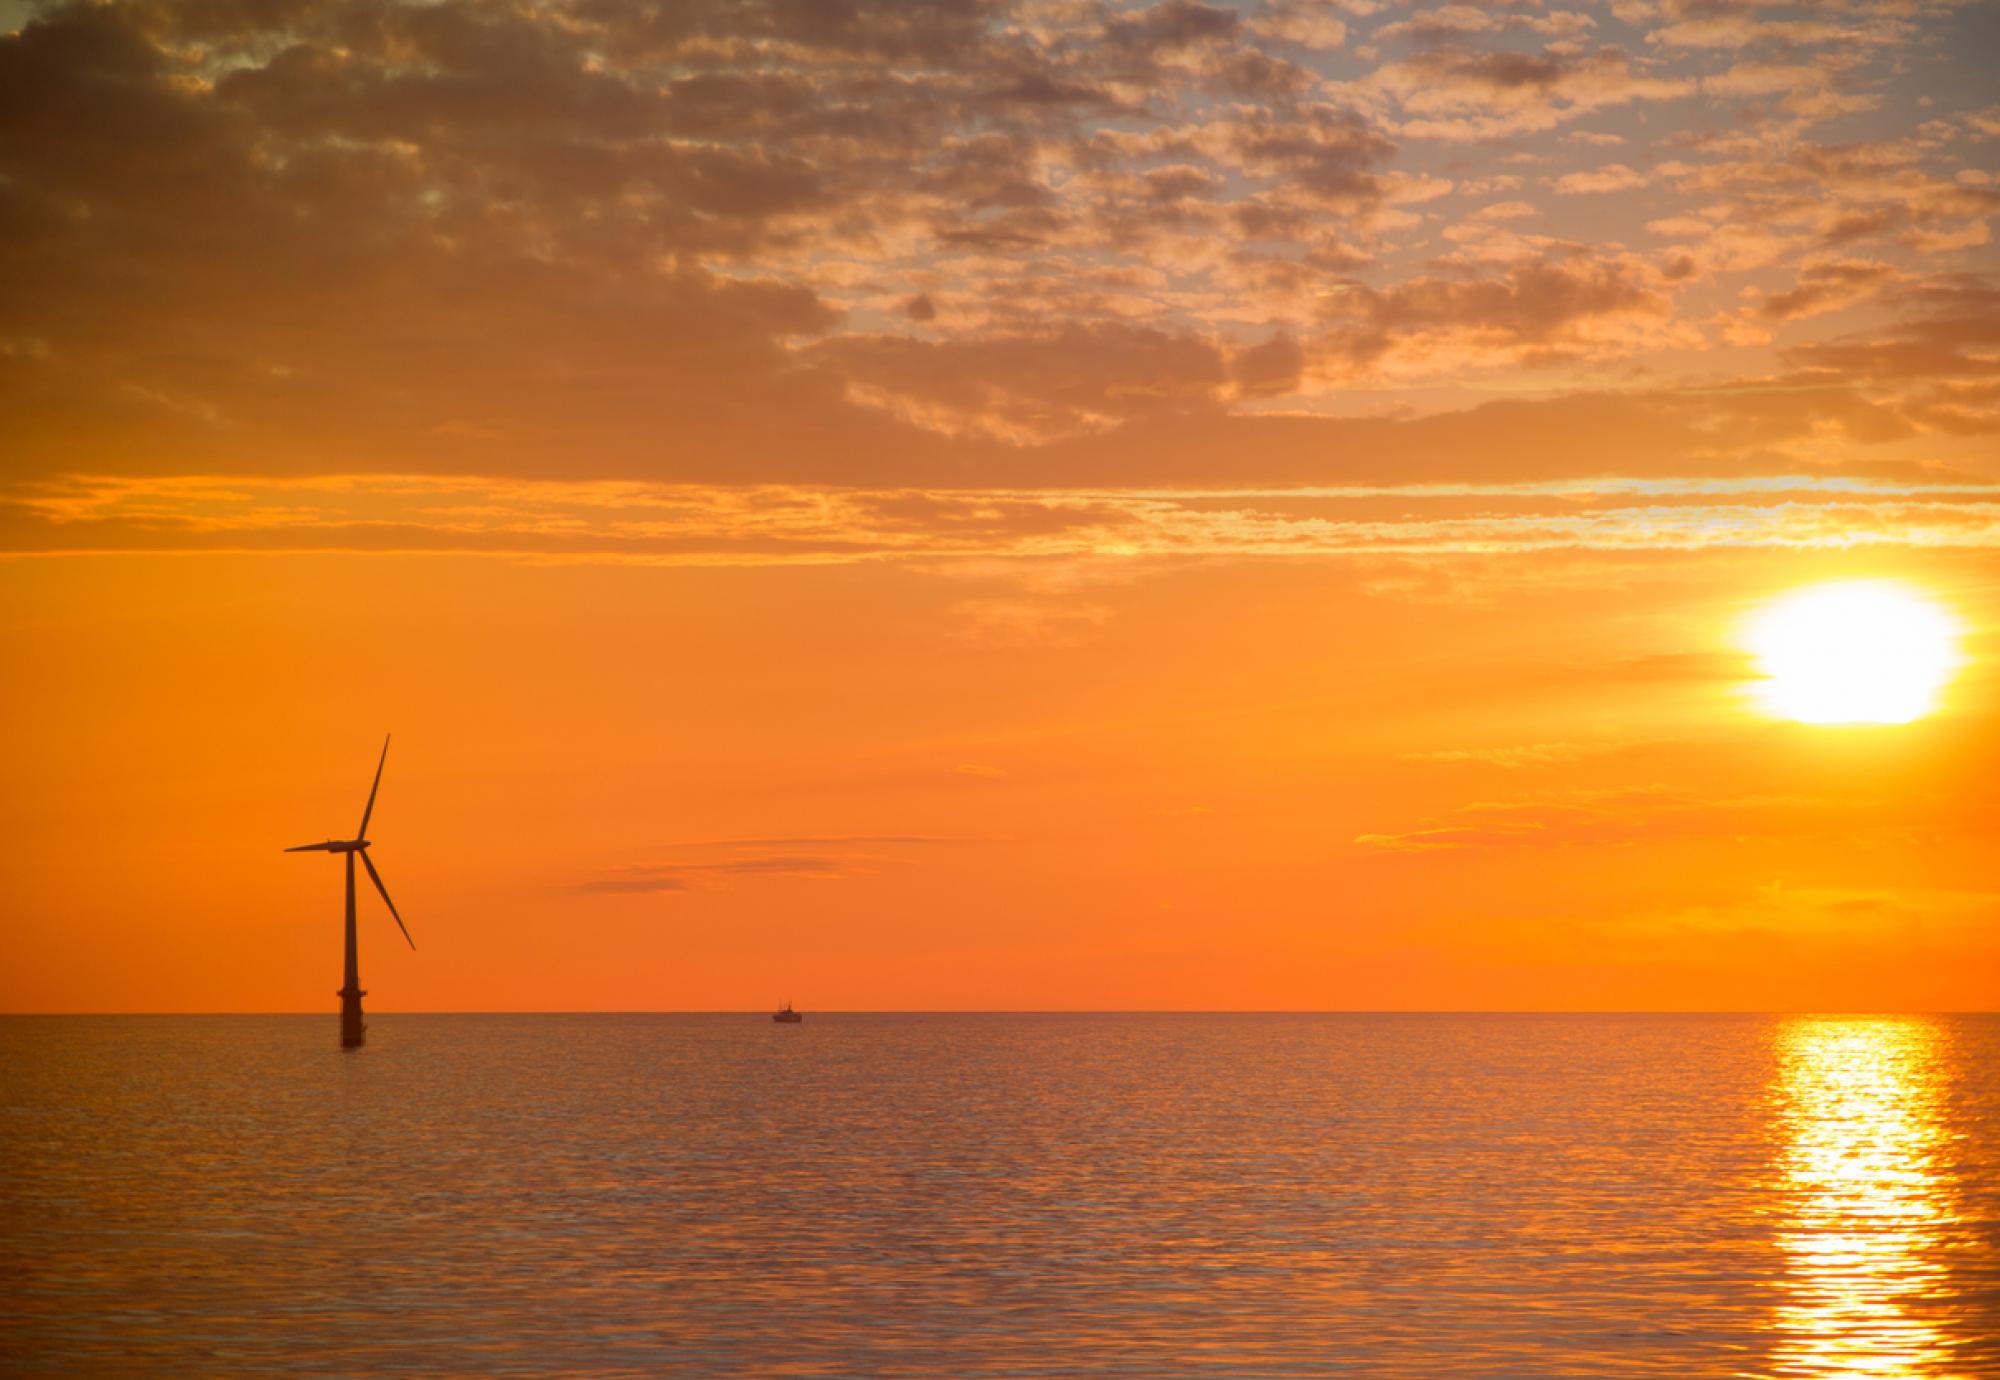 Sunset over the North Sea with a wind turbine in the distance